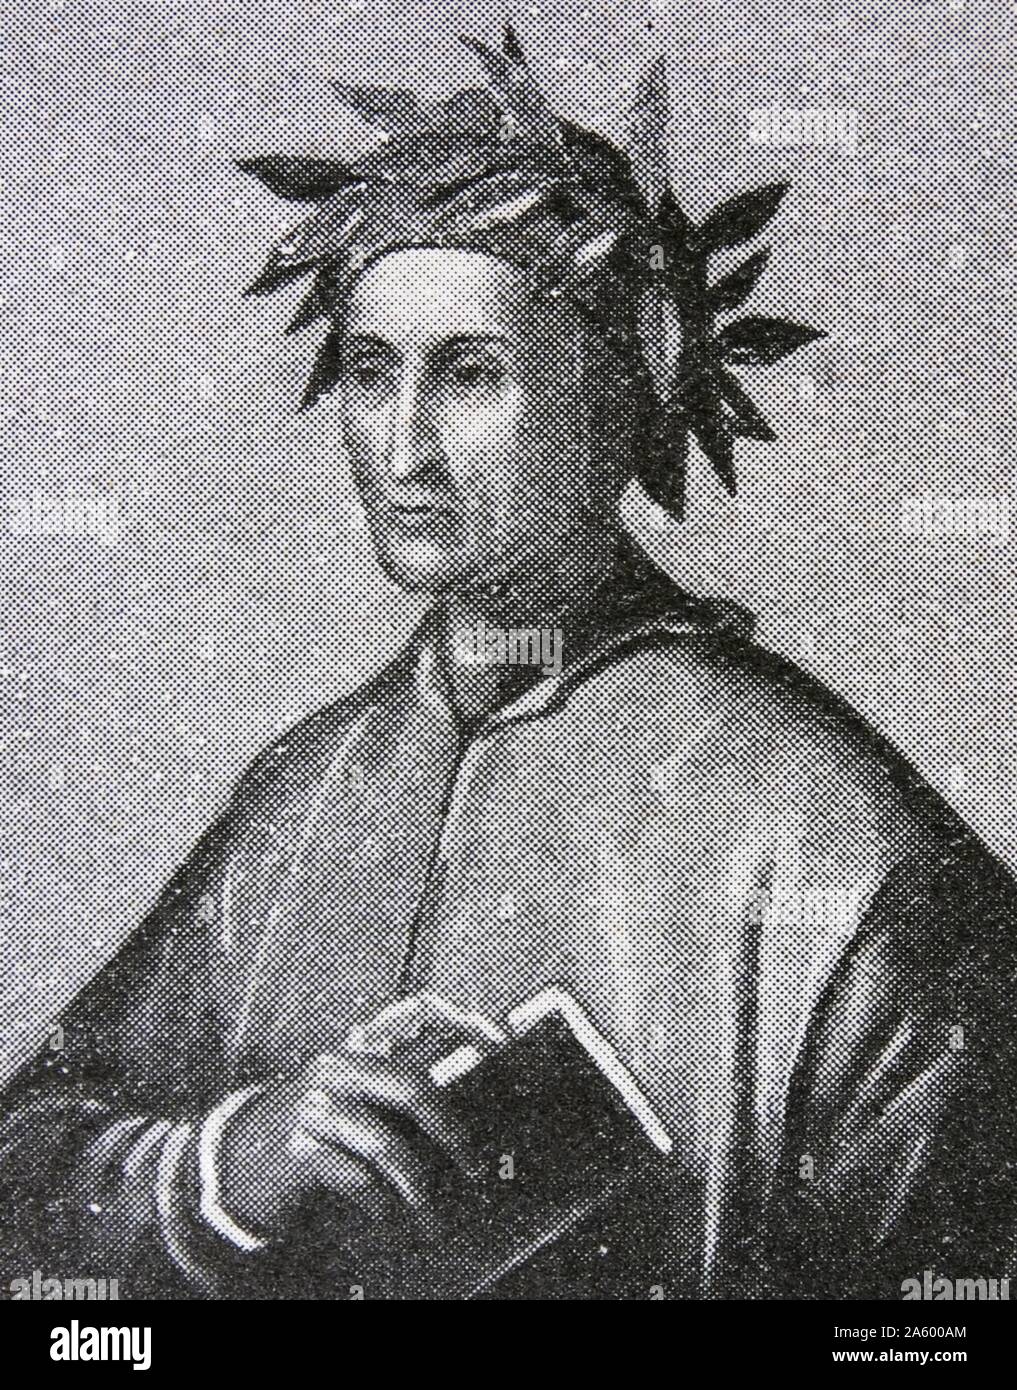 Portrait of Durante degli Alighieri (1265-1321) Italian poet of the late Middle Ages. Dated 14th Century Stock Photo